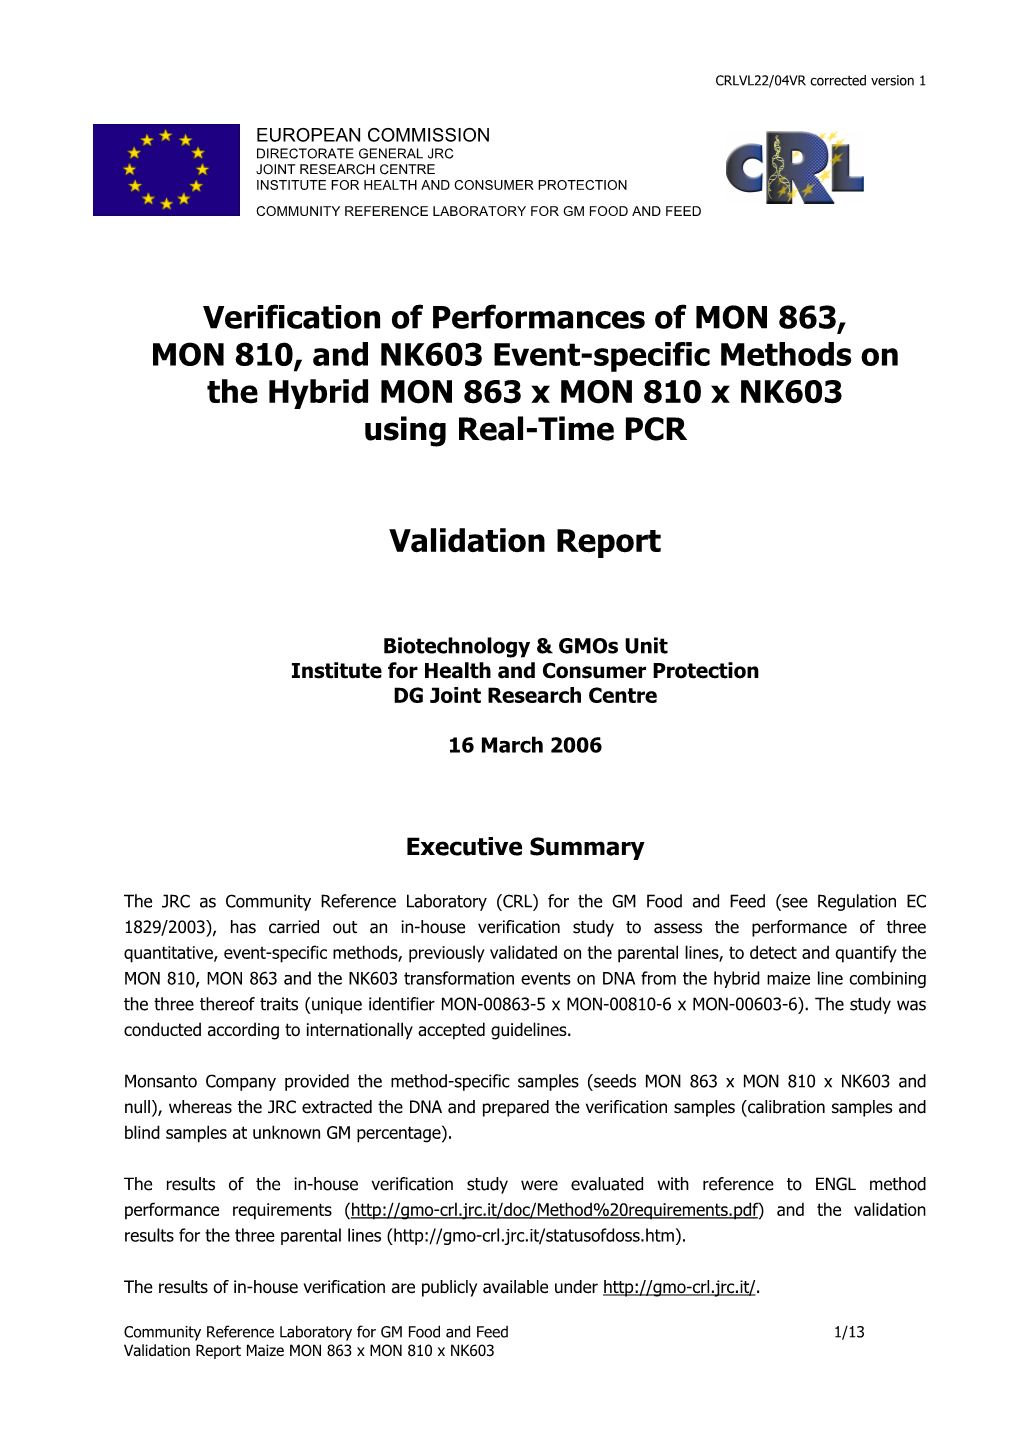 Verification of Performances of MON 863, MON 810, and NK603 Event-Specific Methods on the Hybrid MON 863 X MON 810 X NK603 Using Real-Time PCR